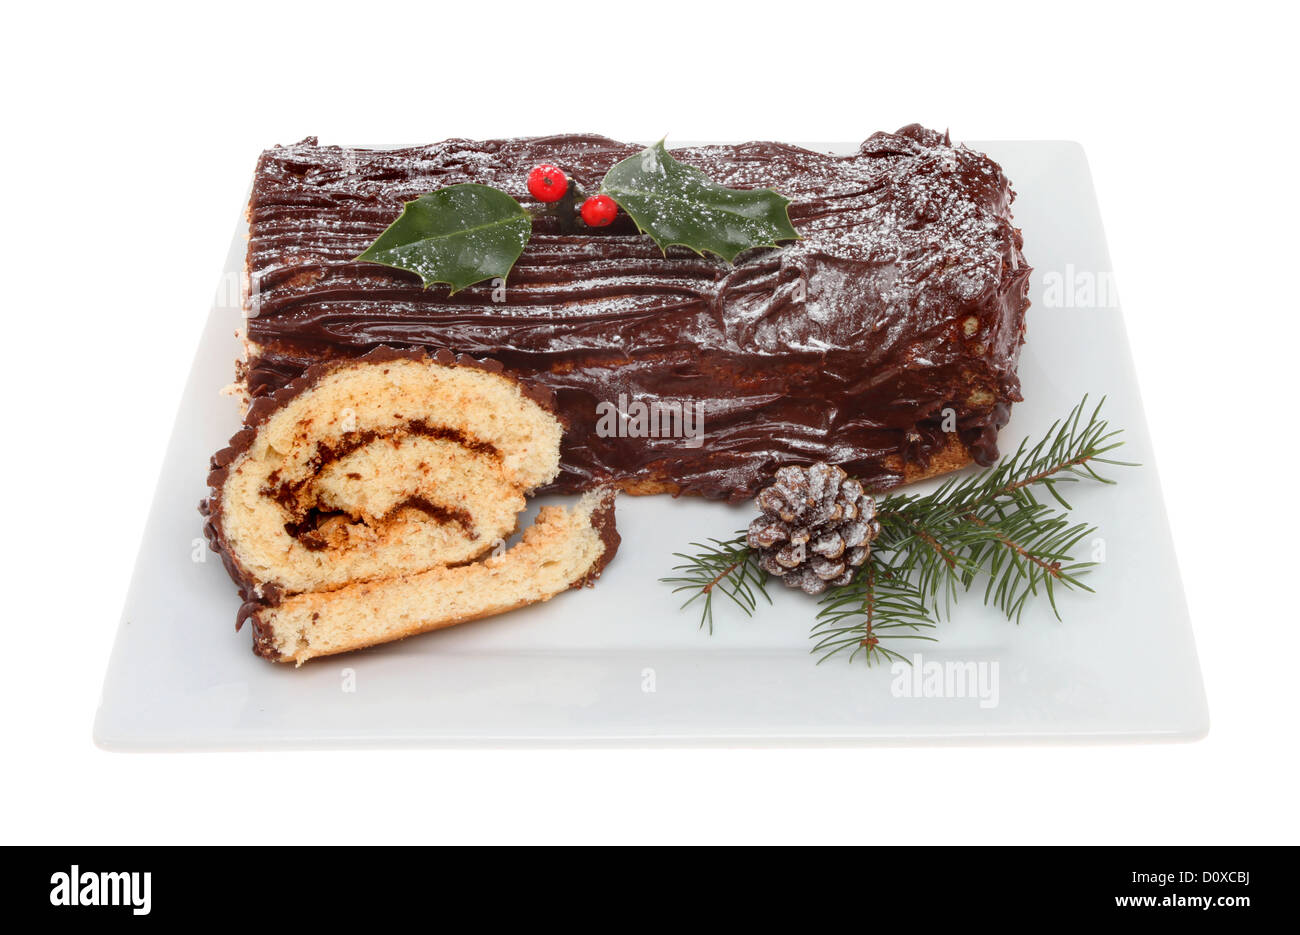 Chocolate yule log on a plate decorated with holly and seasonal foliage isolated against white Stock Photo